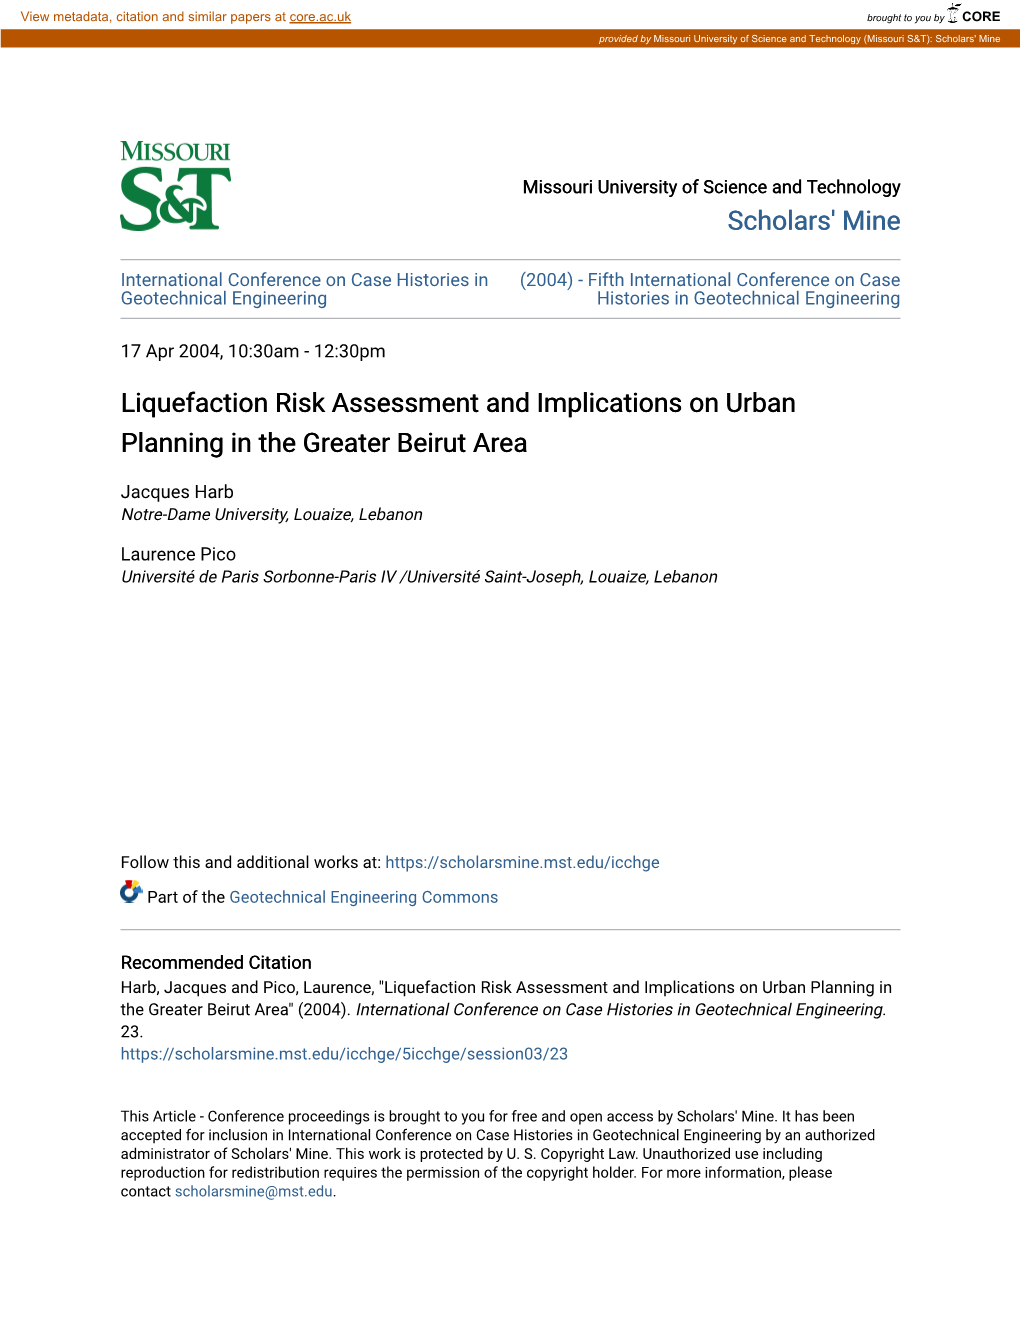 Liquefaction Risk Assessment and Implications on Urban Planning in the Greater Beirut Area